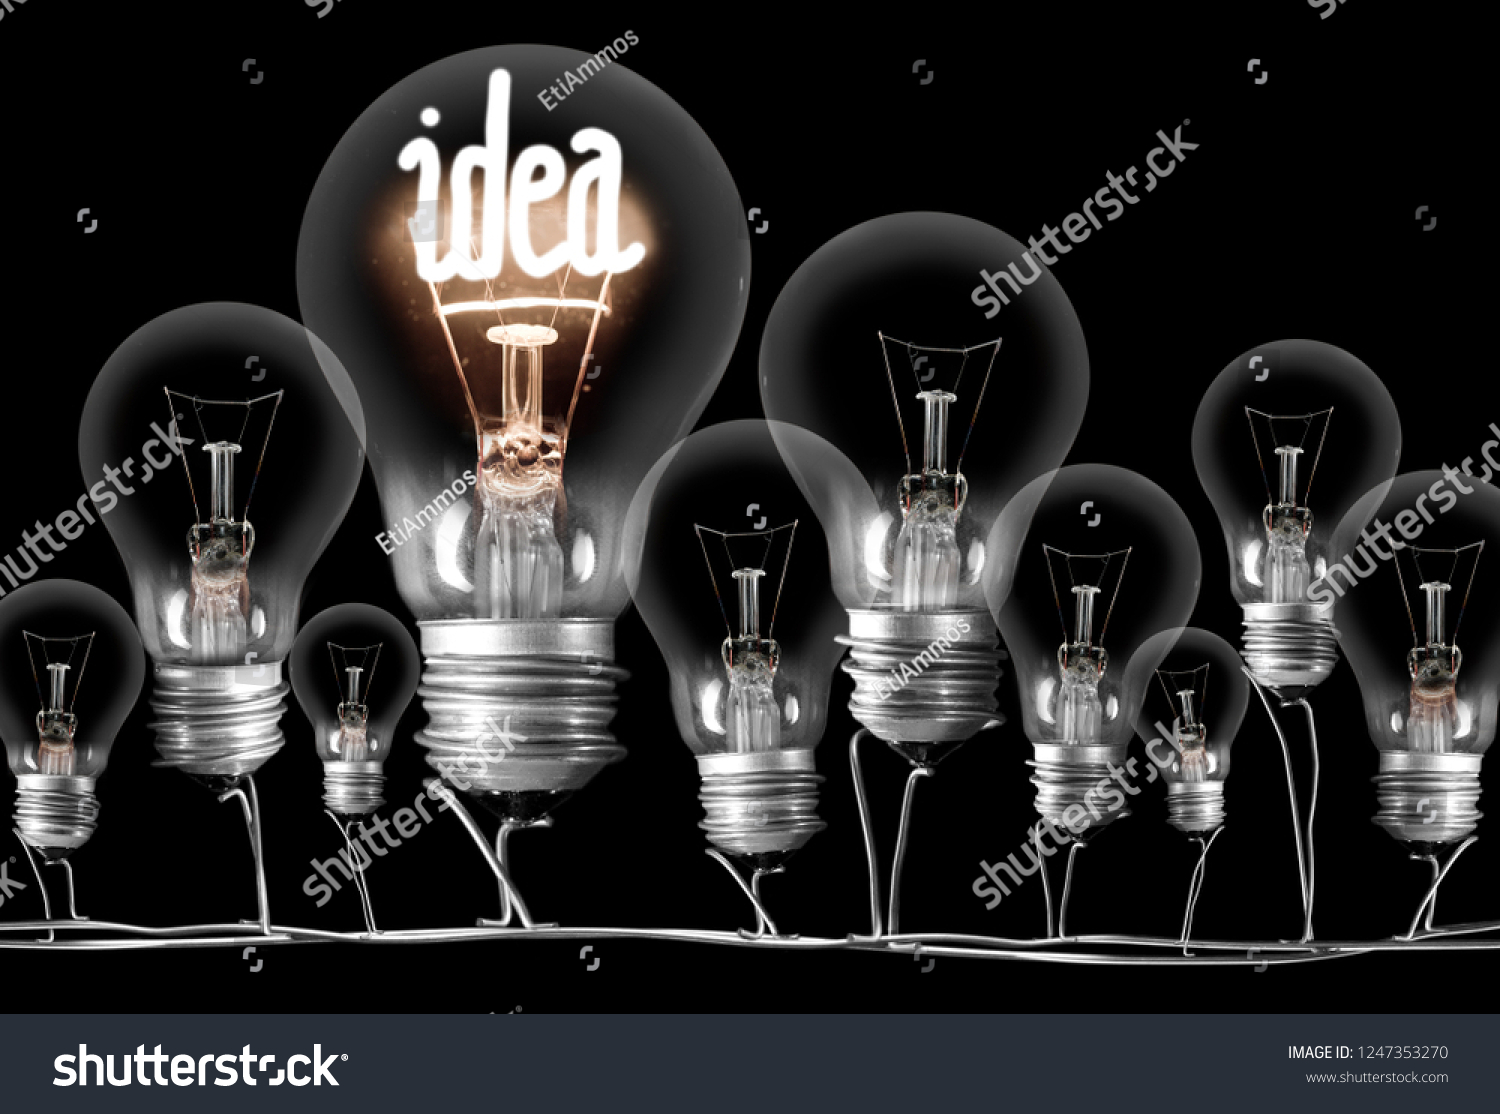 Photo of dark and shining light bulbs with fibe in IDEA shape; concept of idea, innovation, uniqueness and standing out; isolated on black background #1247353270